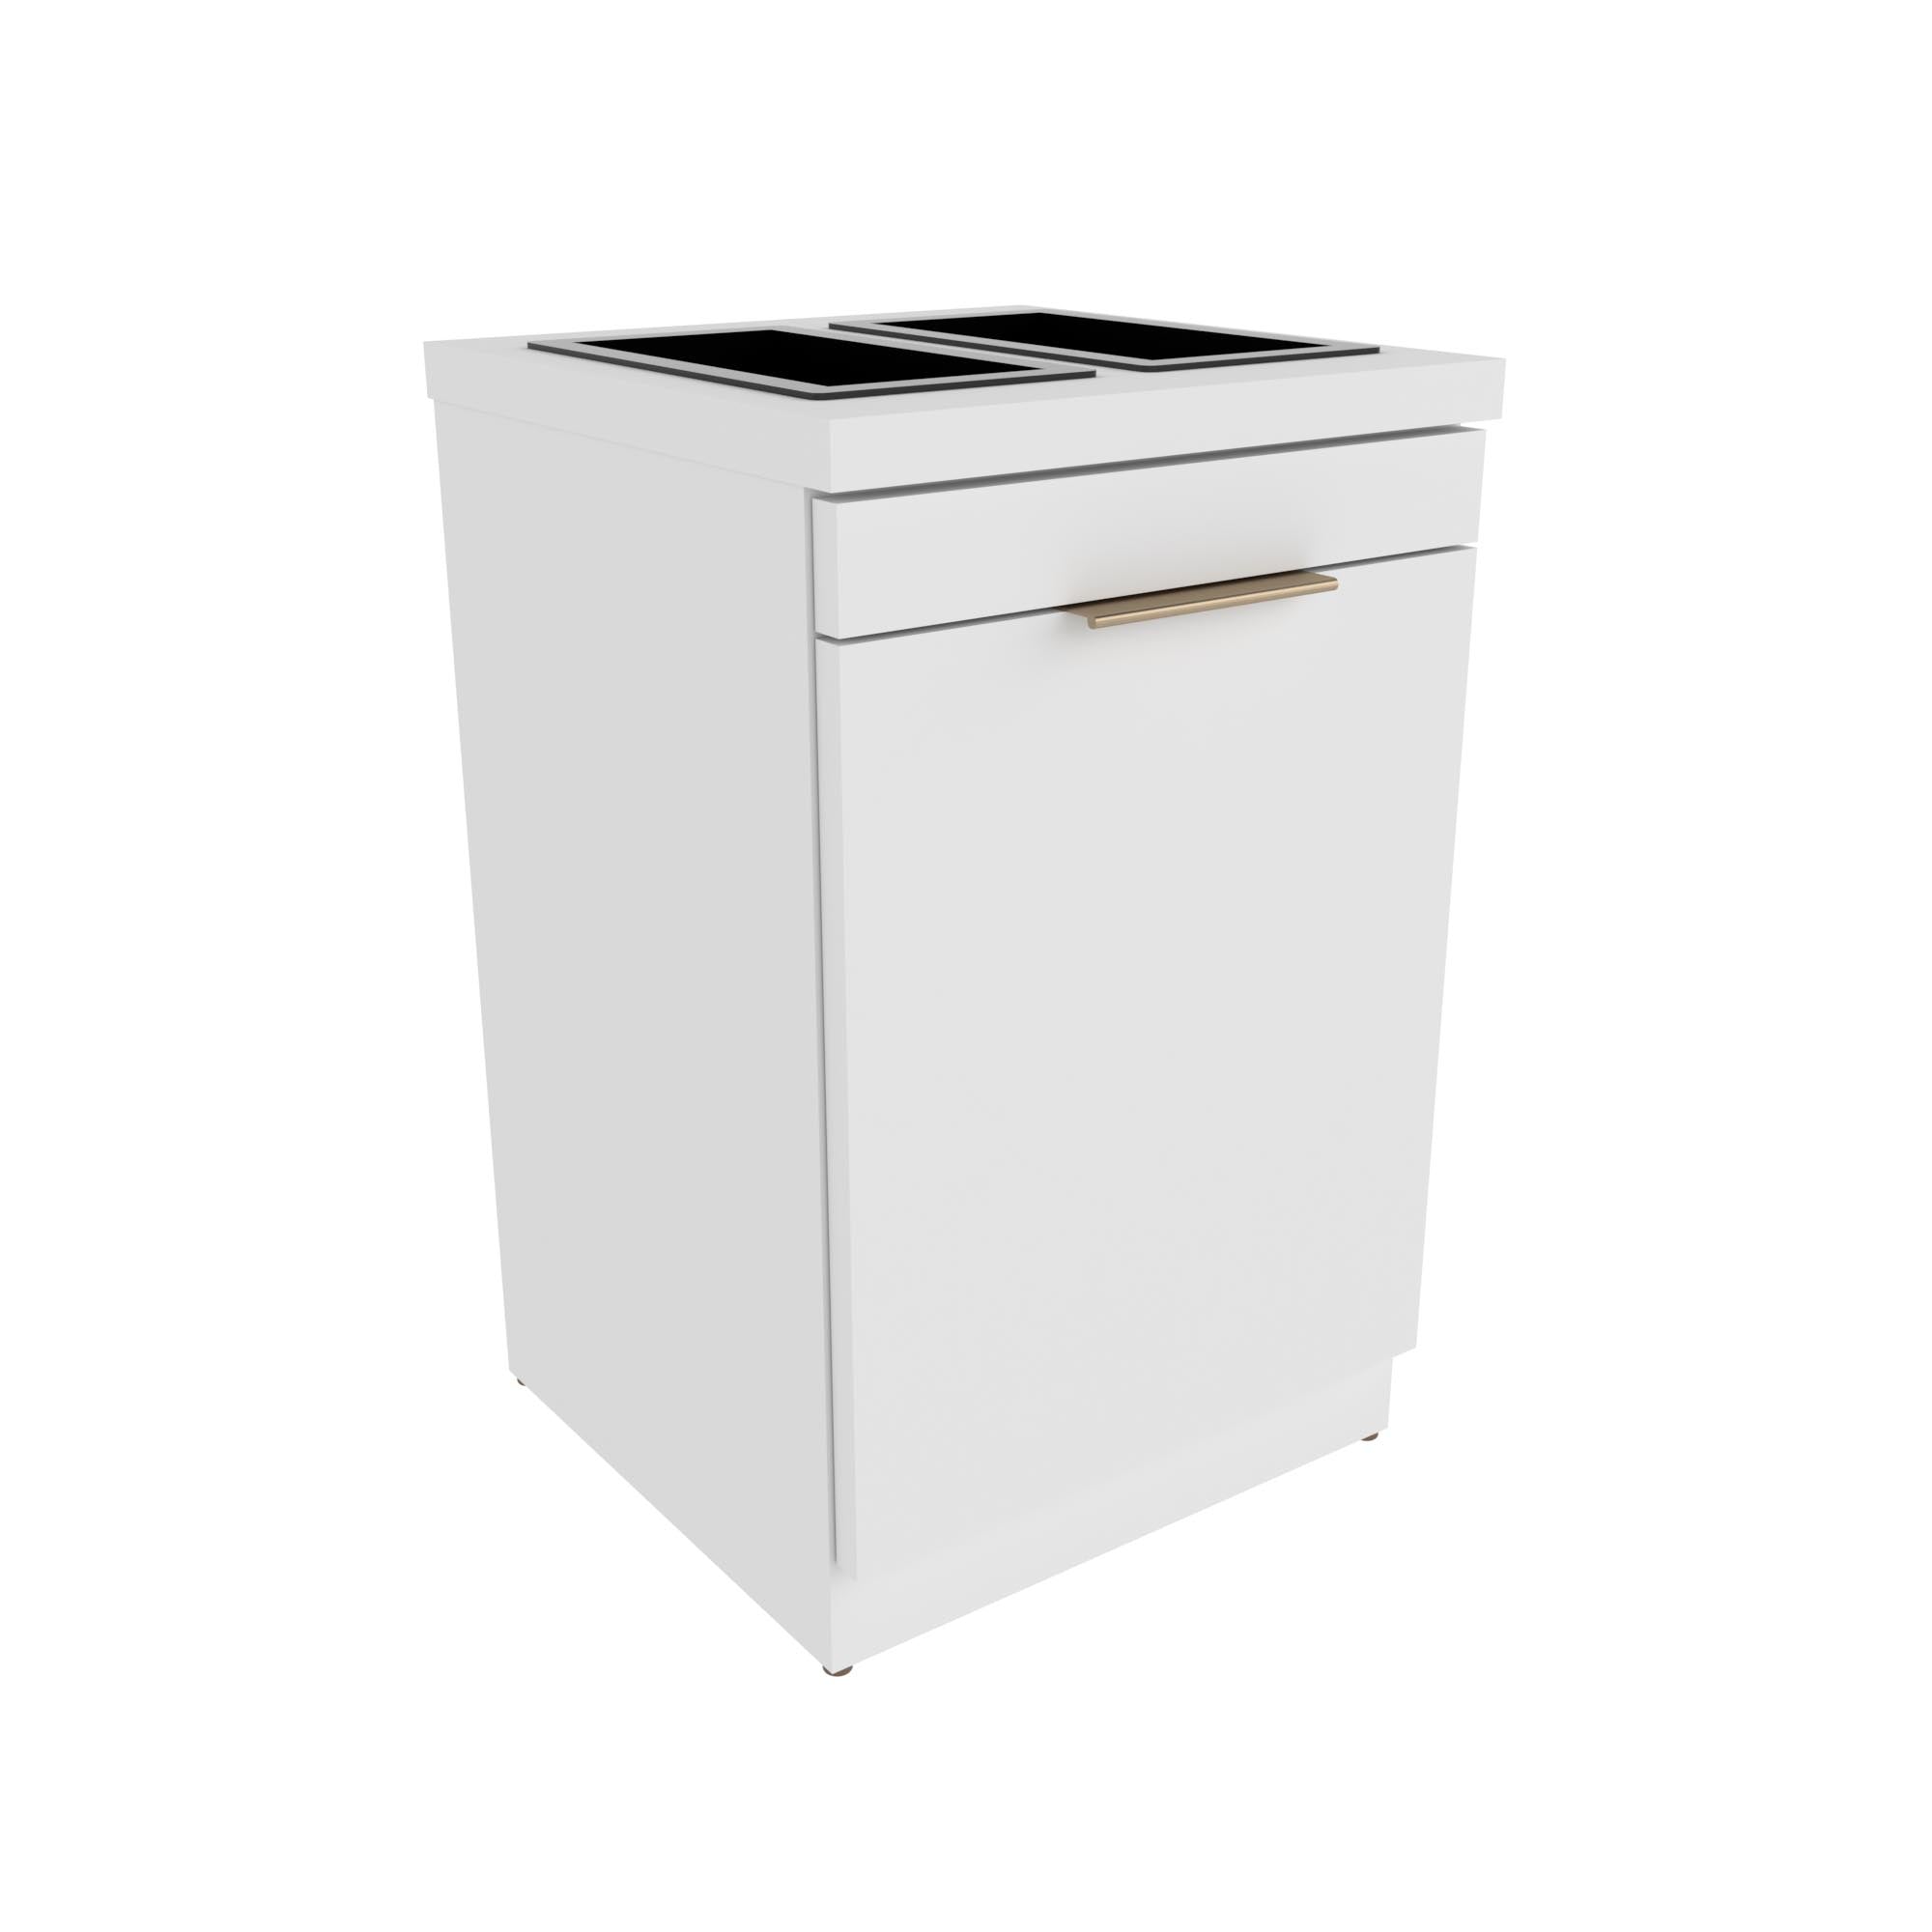 Bottle Well Storage Cabinet - Collins - Salon Equipment and Barber Equipment